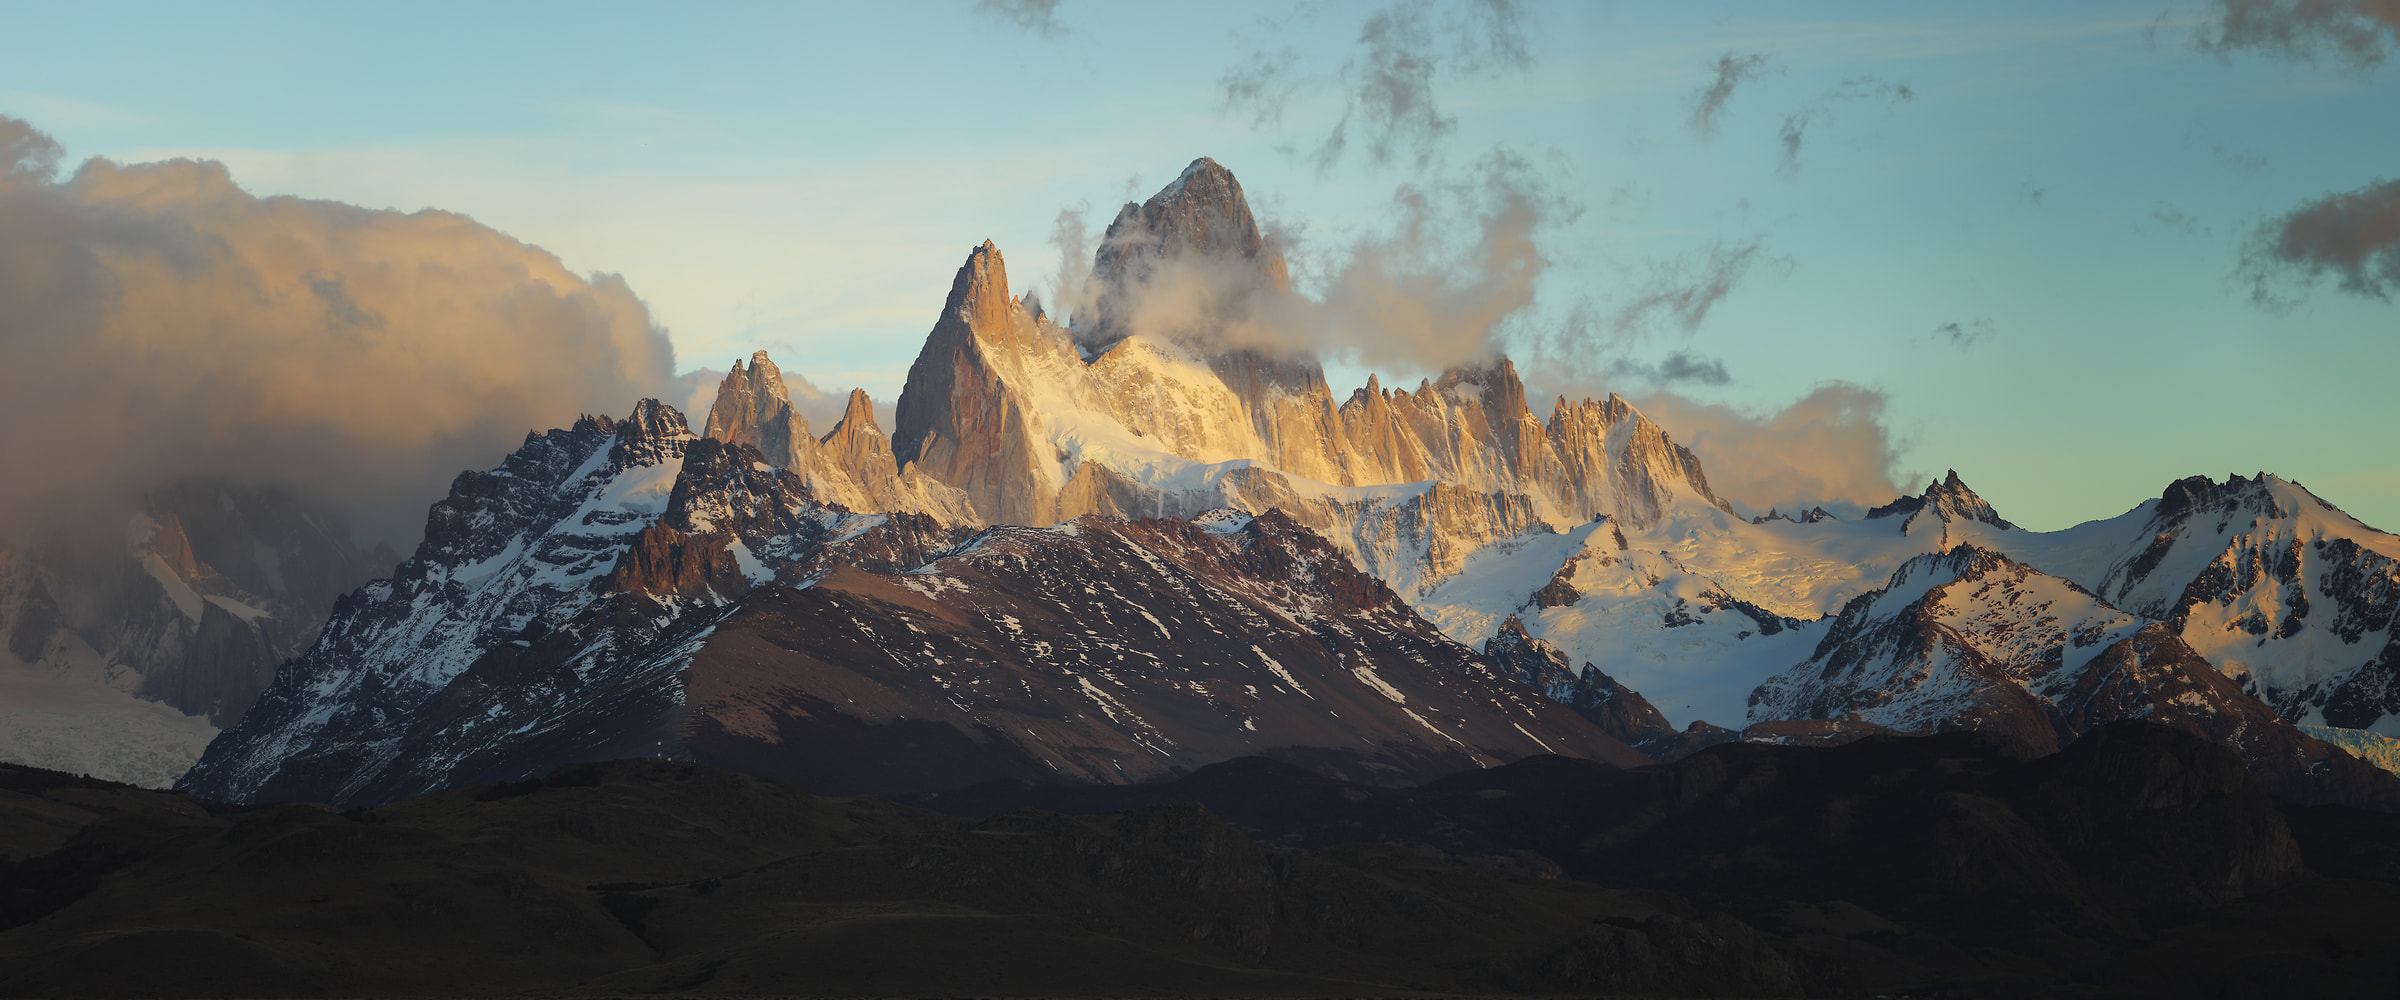 158 megapixels! A very high resolution, large-format VAST photo print of an epic mountain scene with clouds and blue sky above misty mountains; landscape photograph created by Alexandre Deschaumes in El chalten, Argentina, Patagonia.